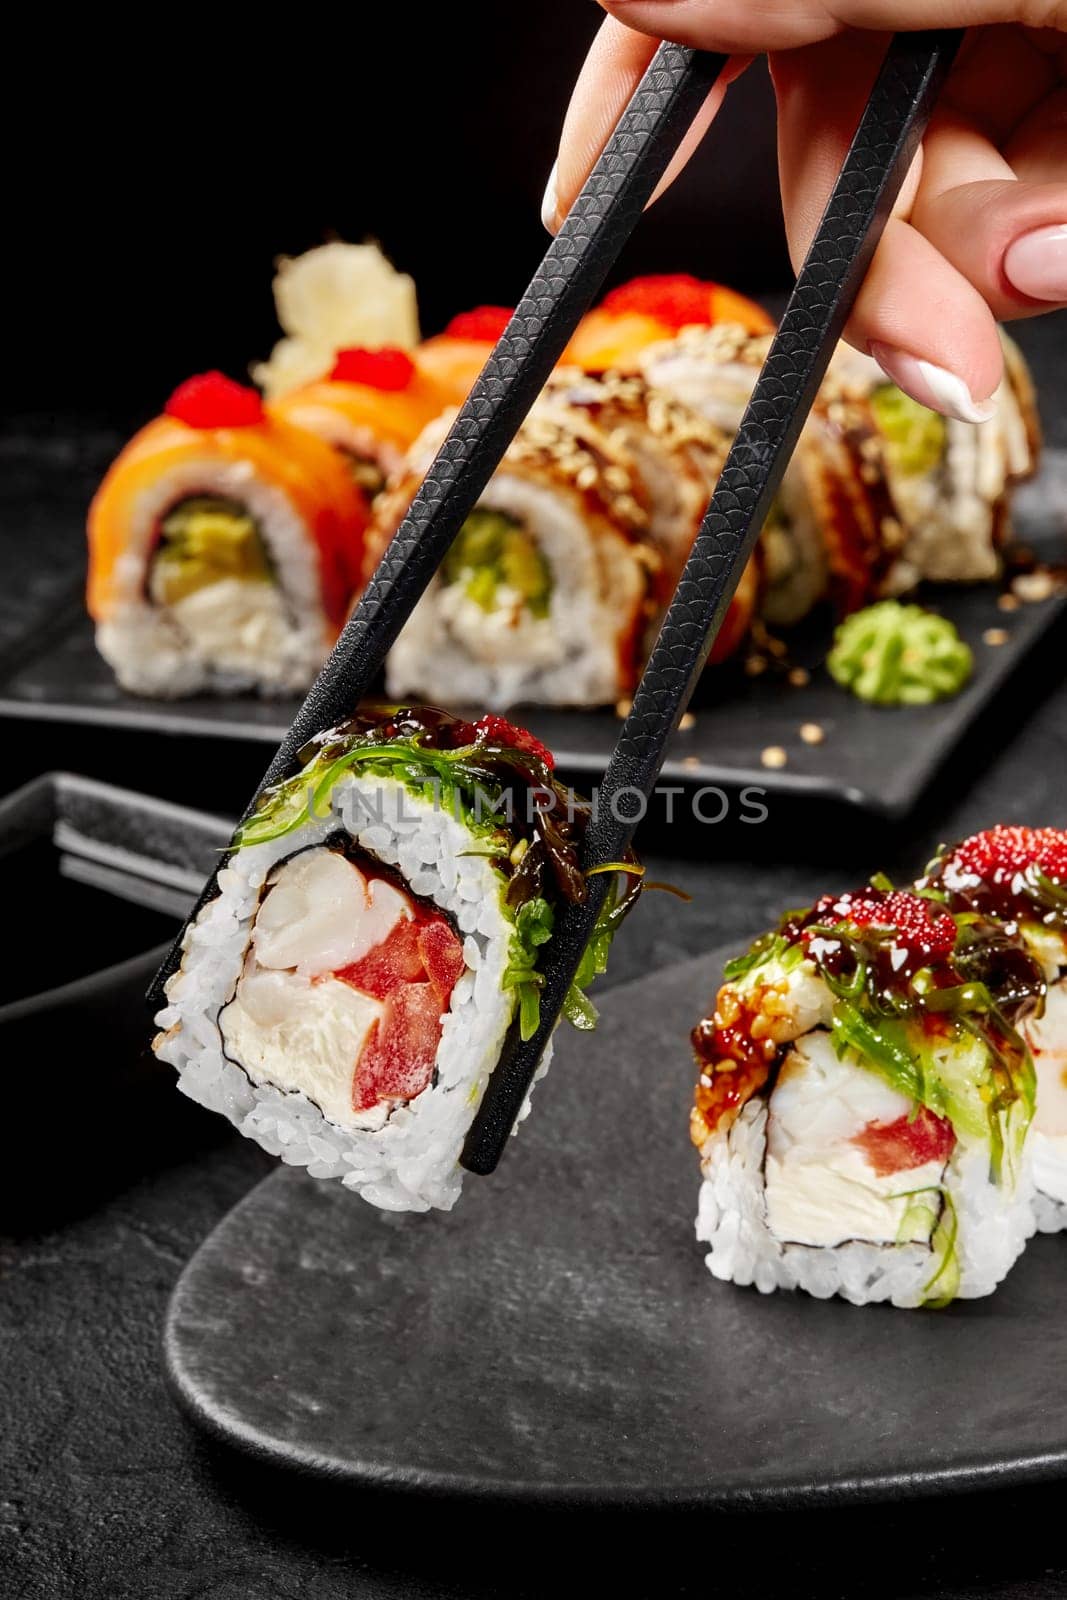 Female hand taking delicious fresh sushi roll filled with cream cheese, crab meat and tomato garnished with wakame, masago and unagi sauce, from slate plate by chopsticks. Popular Japanese snack